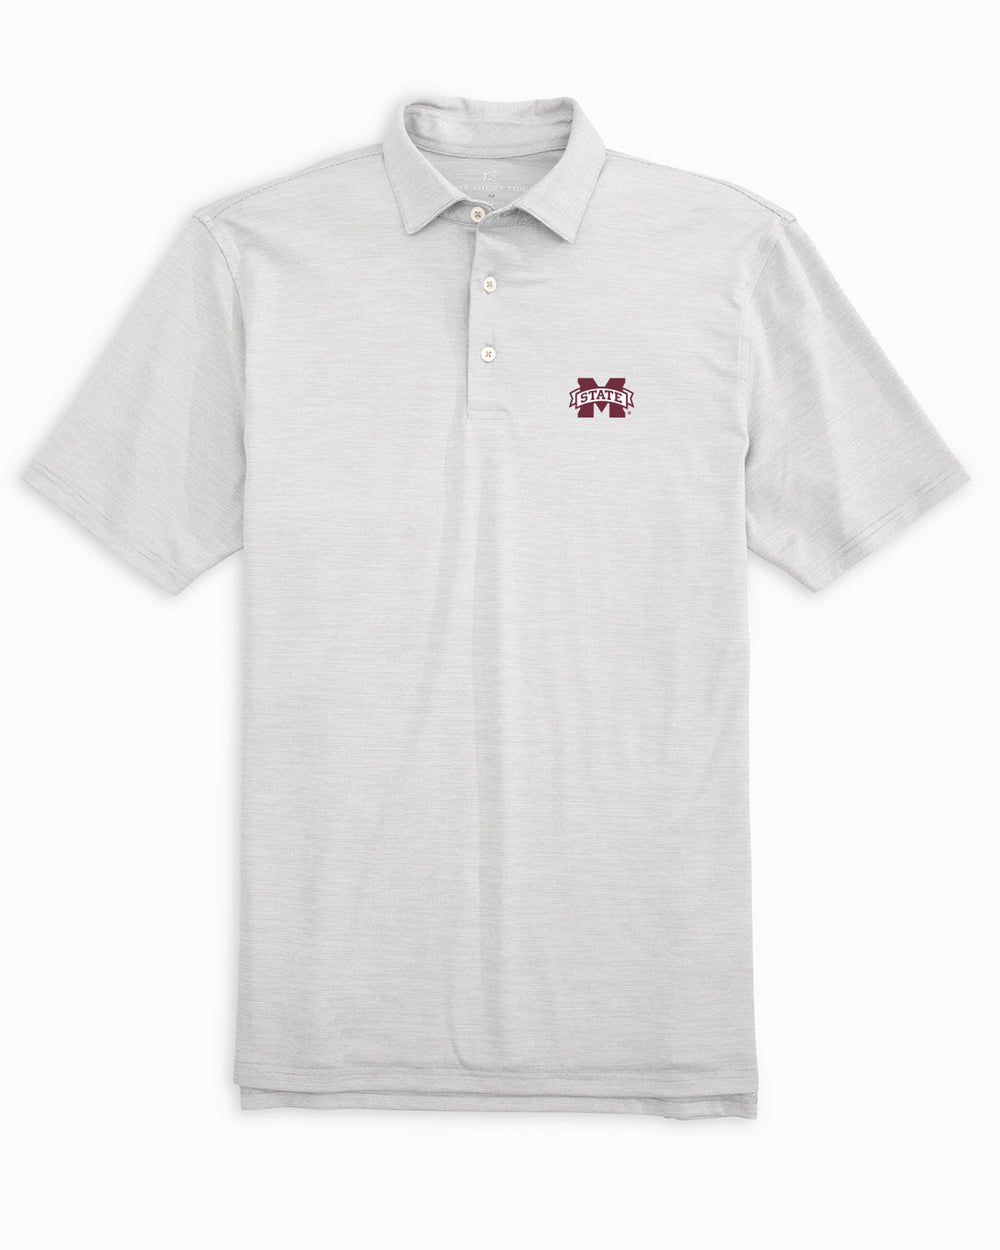 The front of the Mississippi State Bulldogs Driver Spacedye Polo Shirt by Southern Tide - Slate Grey